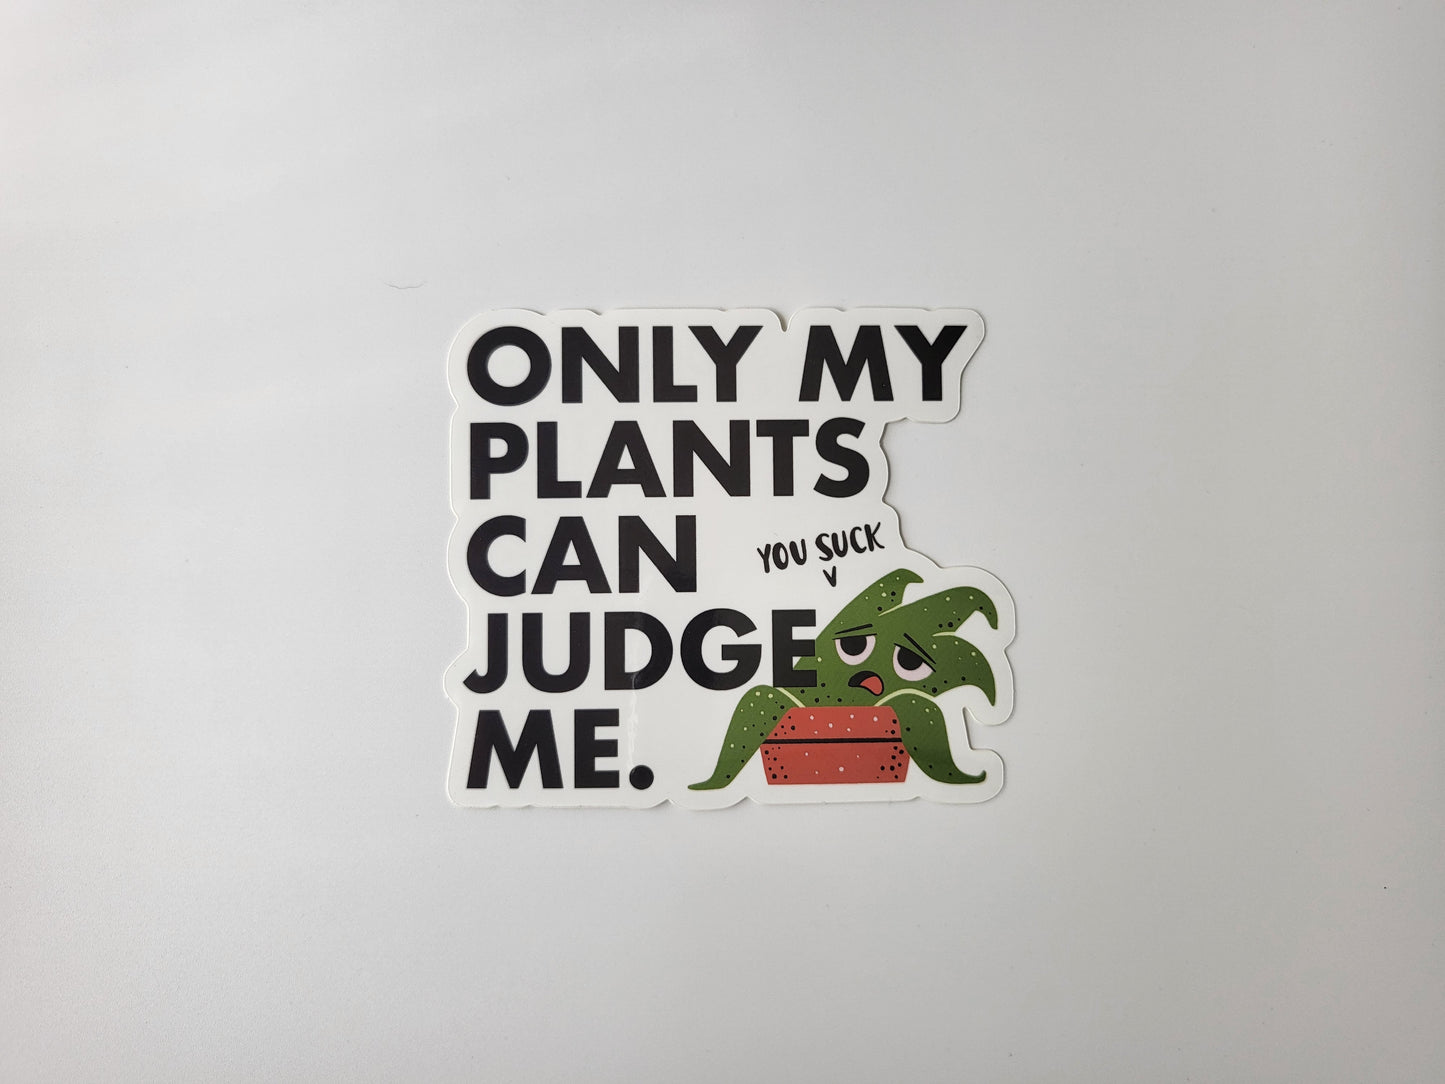 Only My Plants Can Judge Me - Sticker for Indoor Plant Lovers